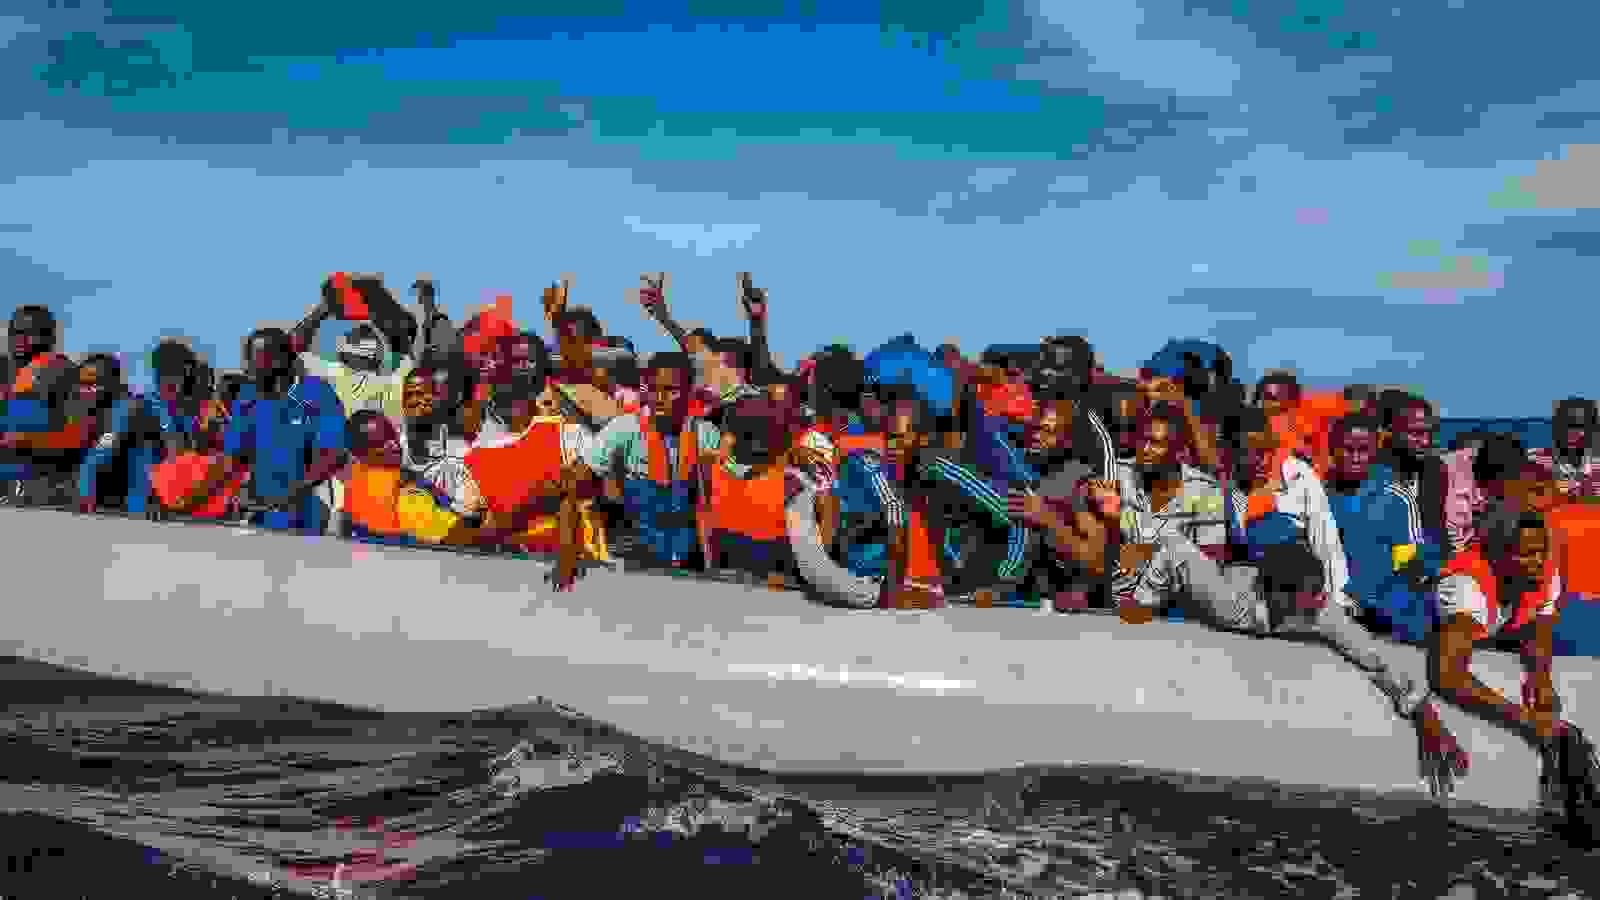 One hundred and nine African refugees from Gambia, Mali, Senegal, Ivory Coast, Guinea, and Nigeria are rescued by the Italian navy from a rubber boat in the sea between Italy and Libya, October 2014. 